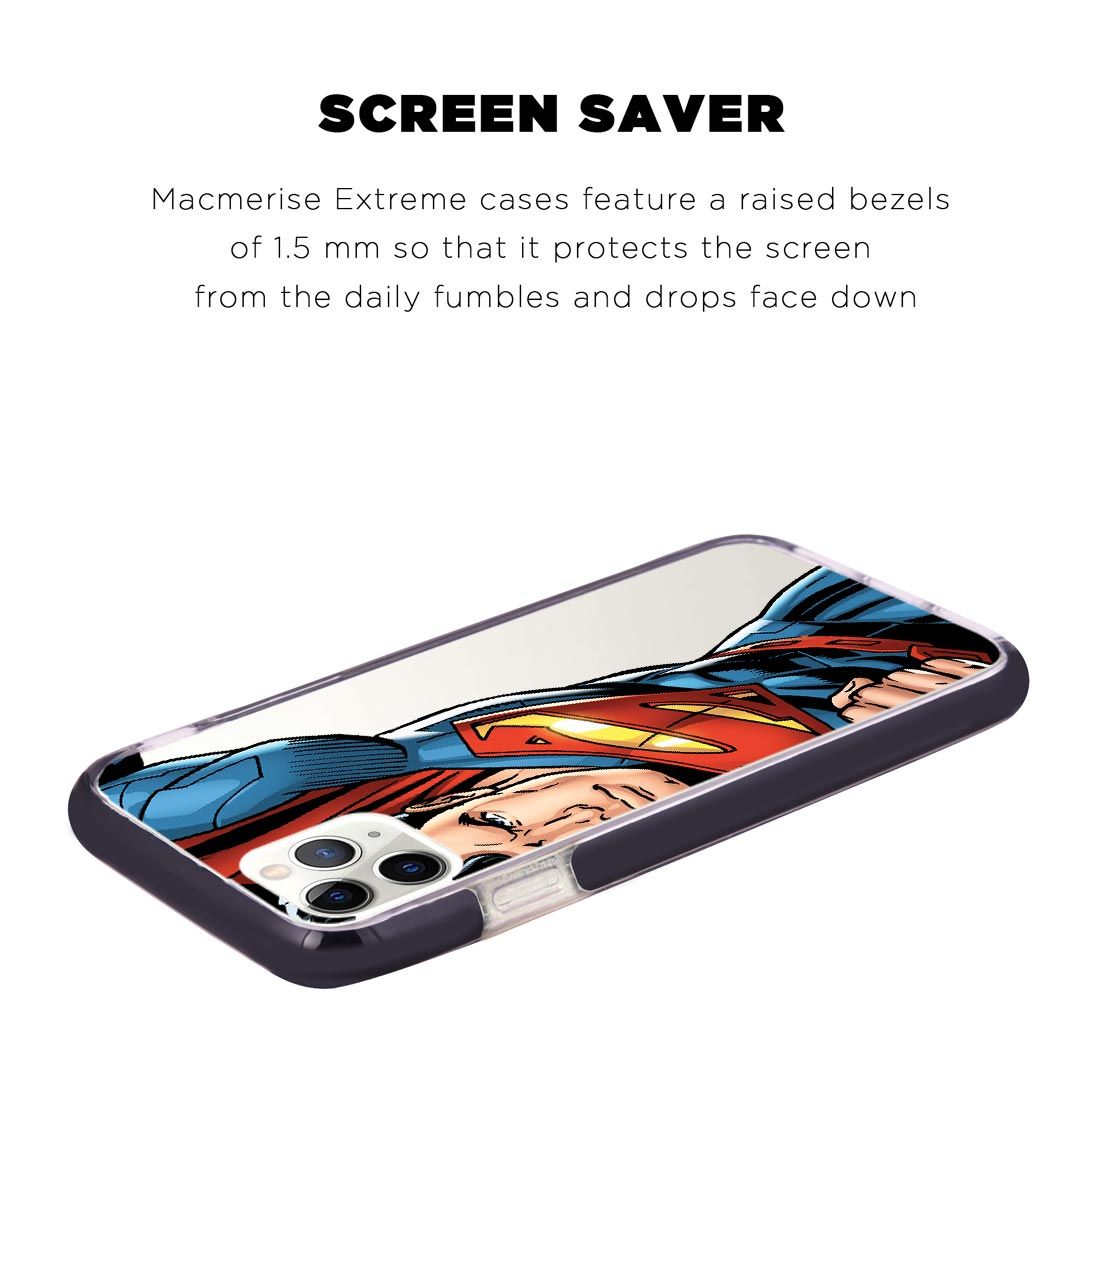 Speed it like Superman - Extreme Phone Case for iPhone 11 Pro